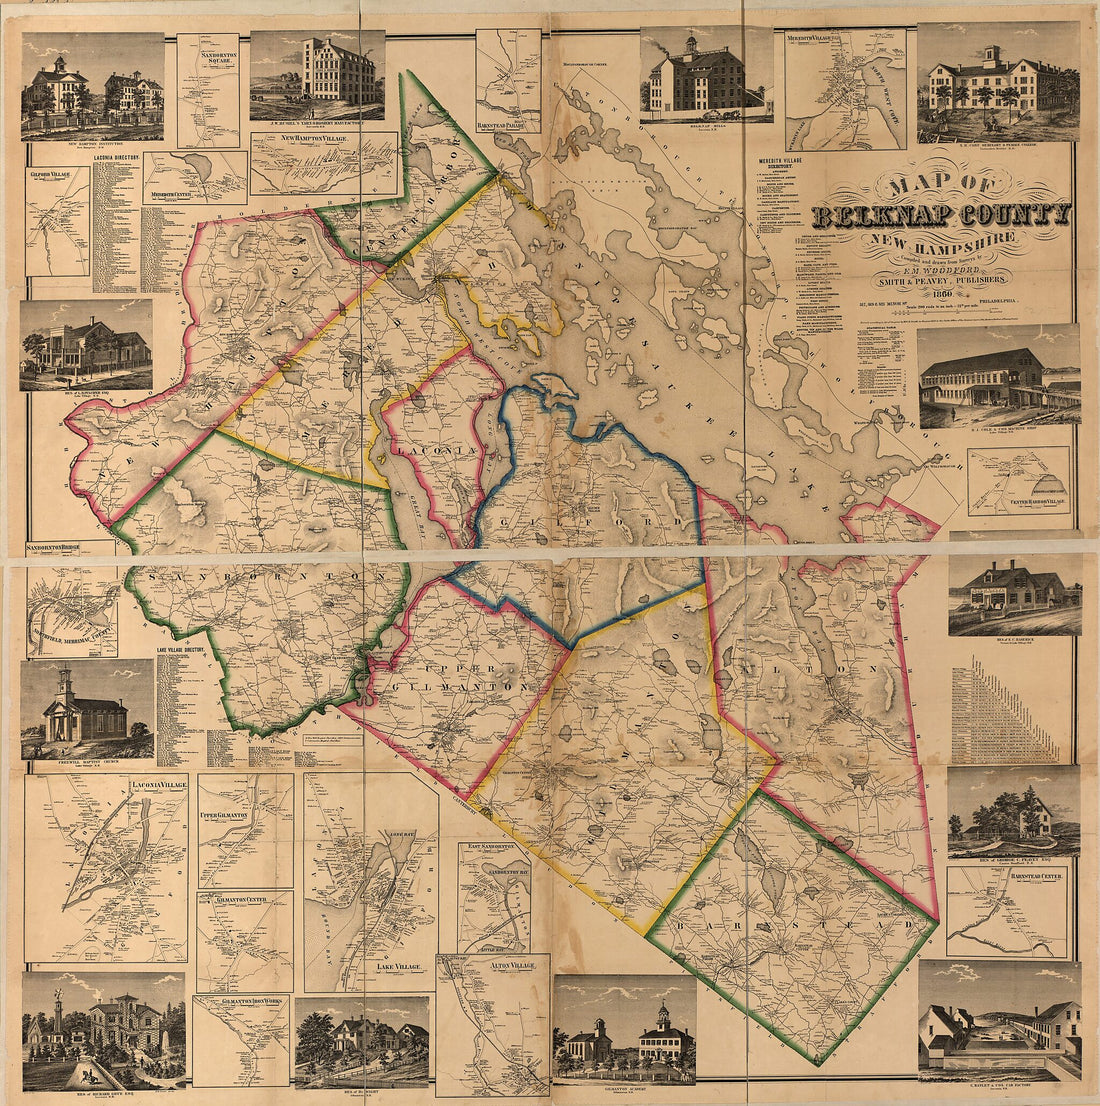 This old map of Map of Belknap County, New Hampshire from 1860 was created by  Smith &amp; Peavey, E. M. Woodford in 1860